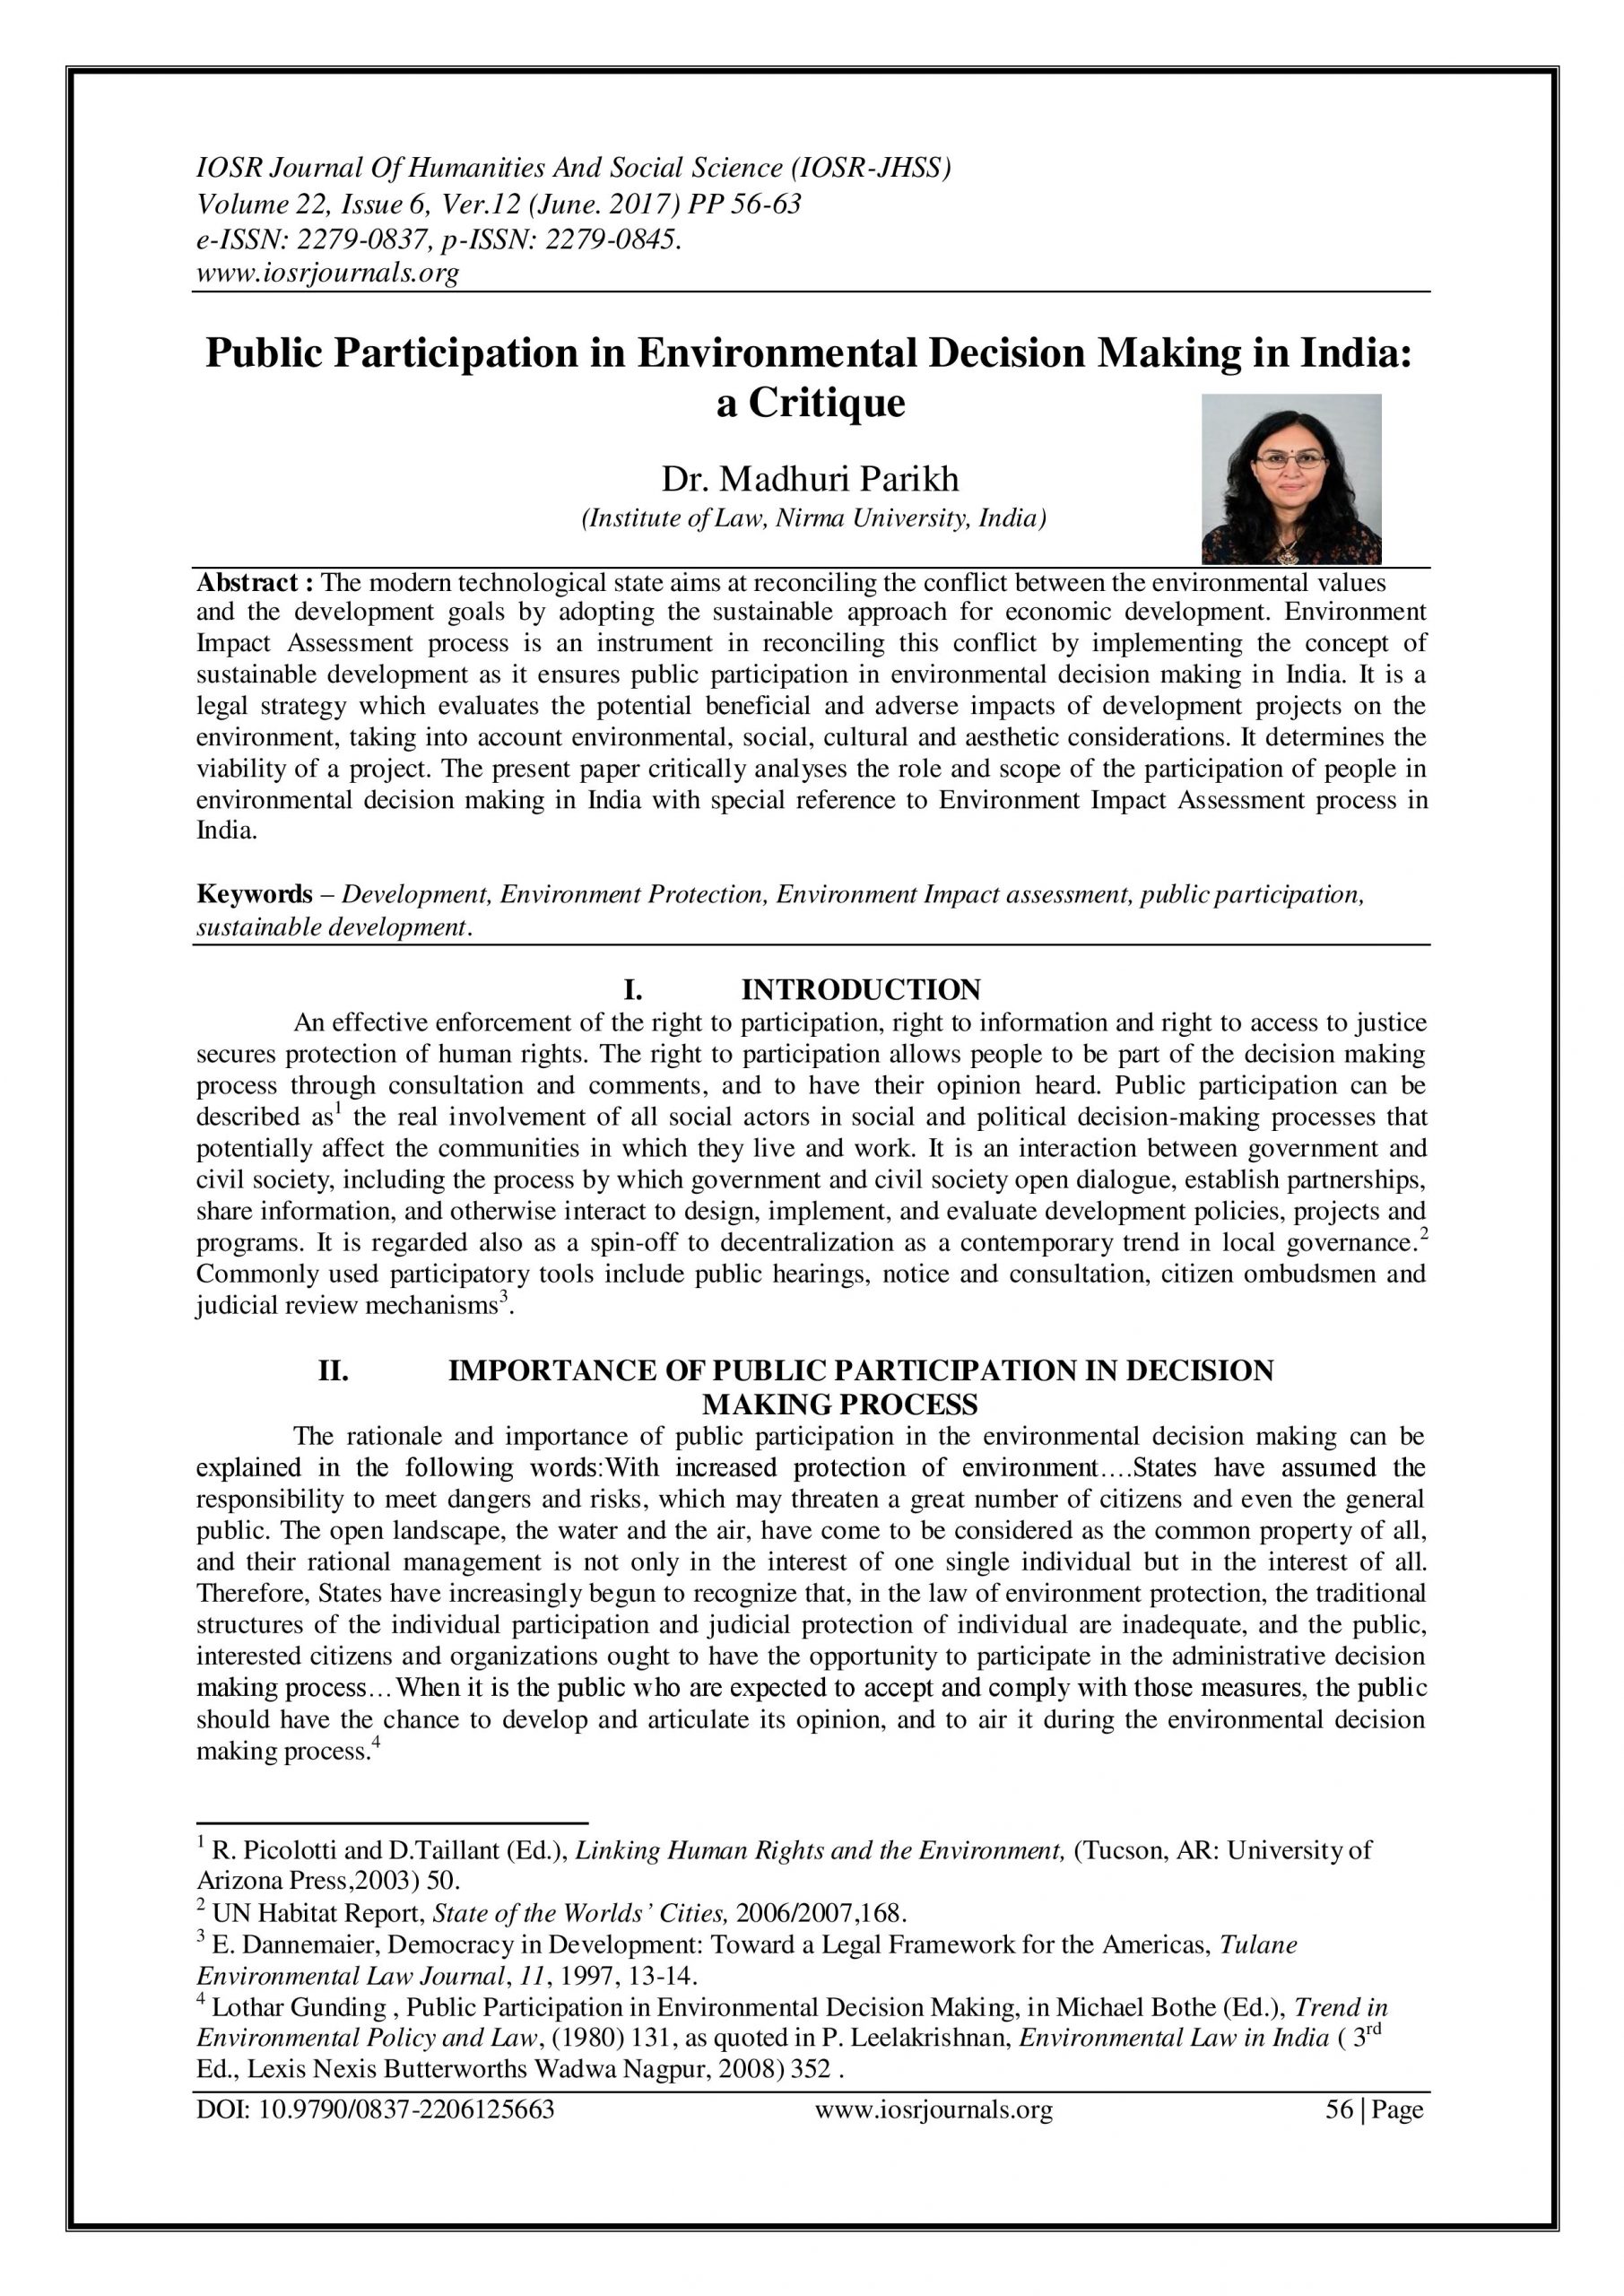 Public Participation in Environmental Decision Making in India: A Critique